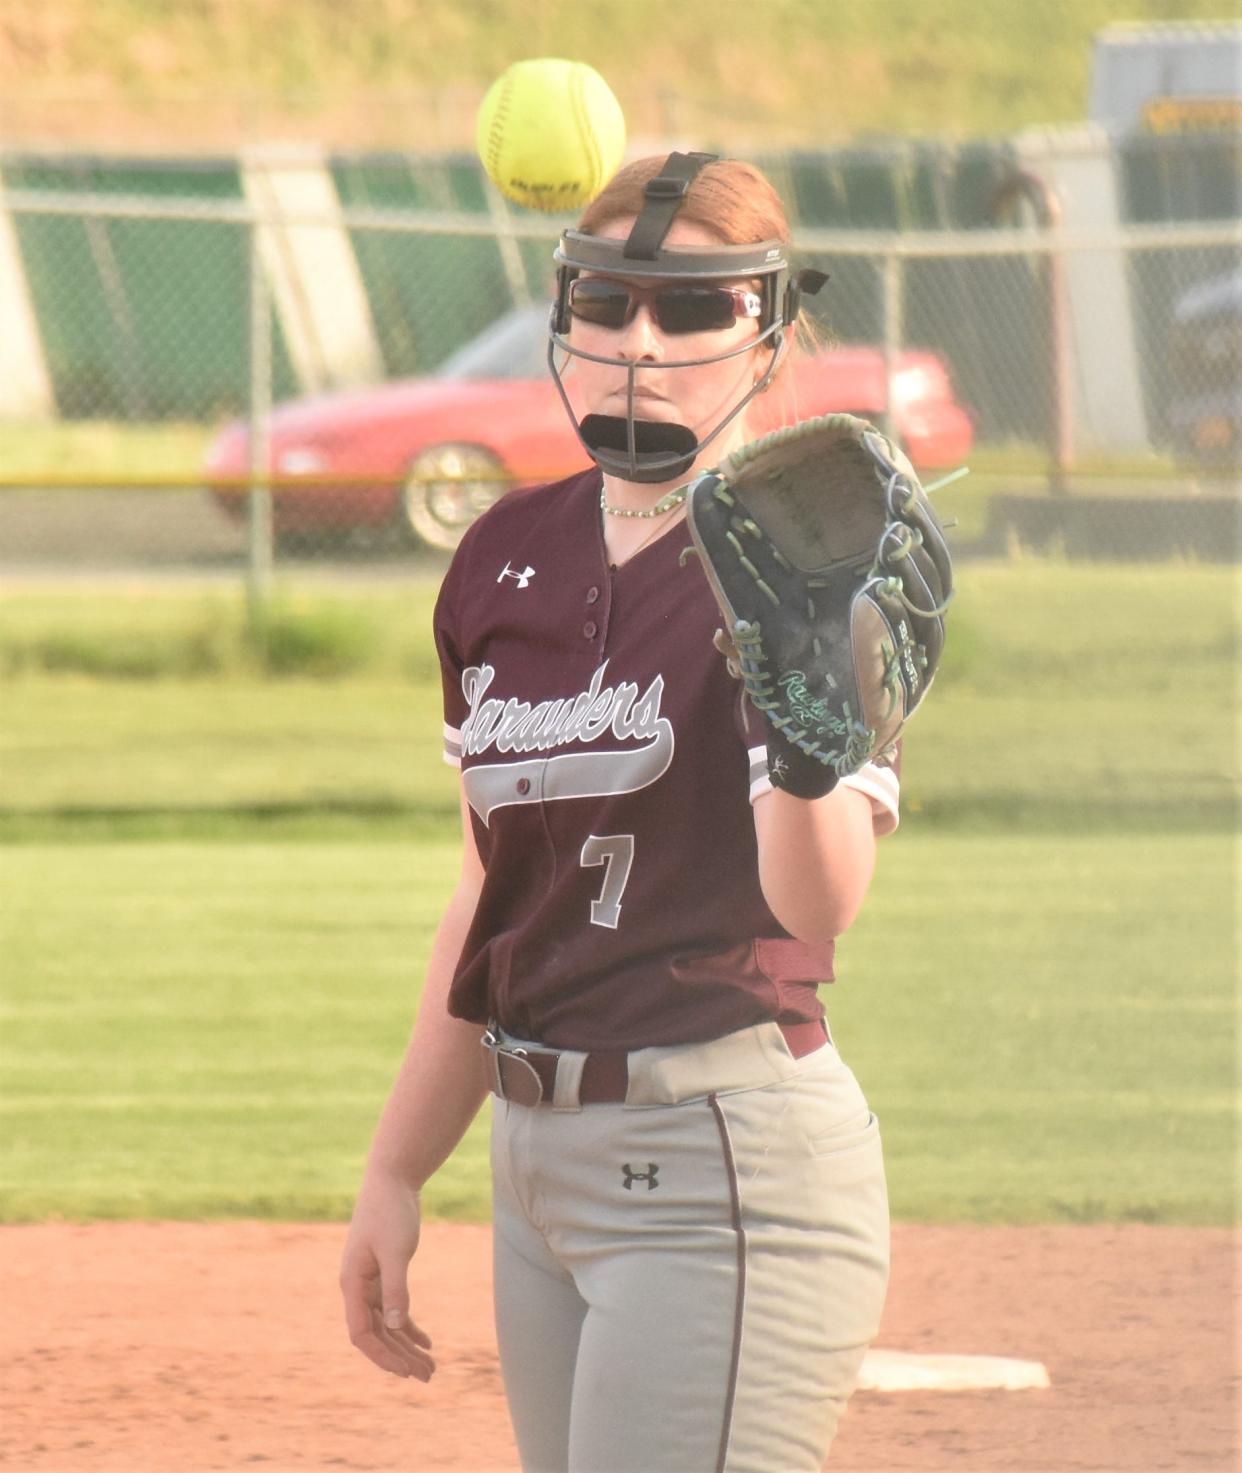 Sherburne-Earlville pitcher Haleigh Fisher prepares to catch the return throw from her catcher in Herkimer Monday. Fisher pitched a one-hit shutout and walked one batter while striking out 17 Magicians; she retired 17 consecutive batters between the first and seventh innings.